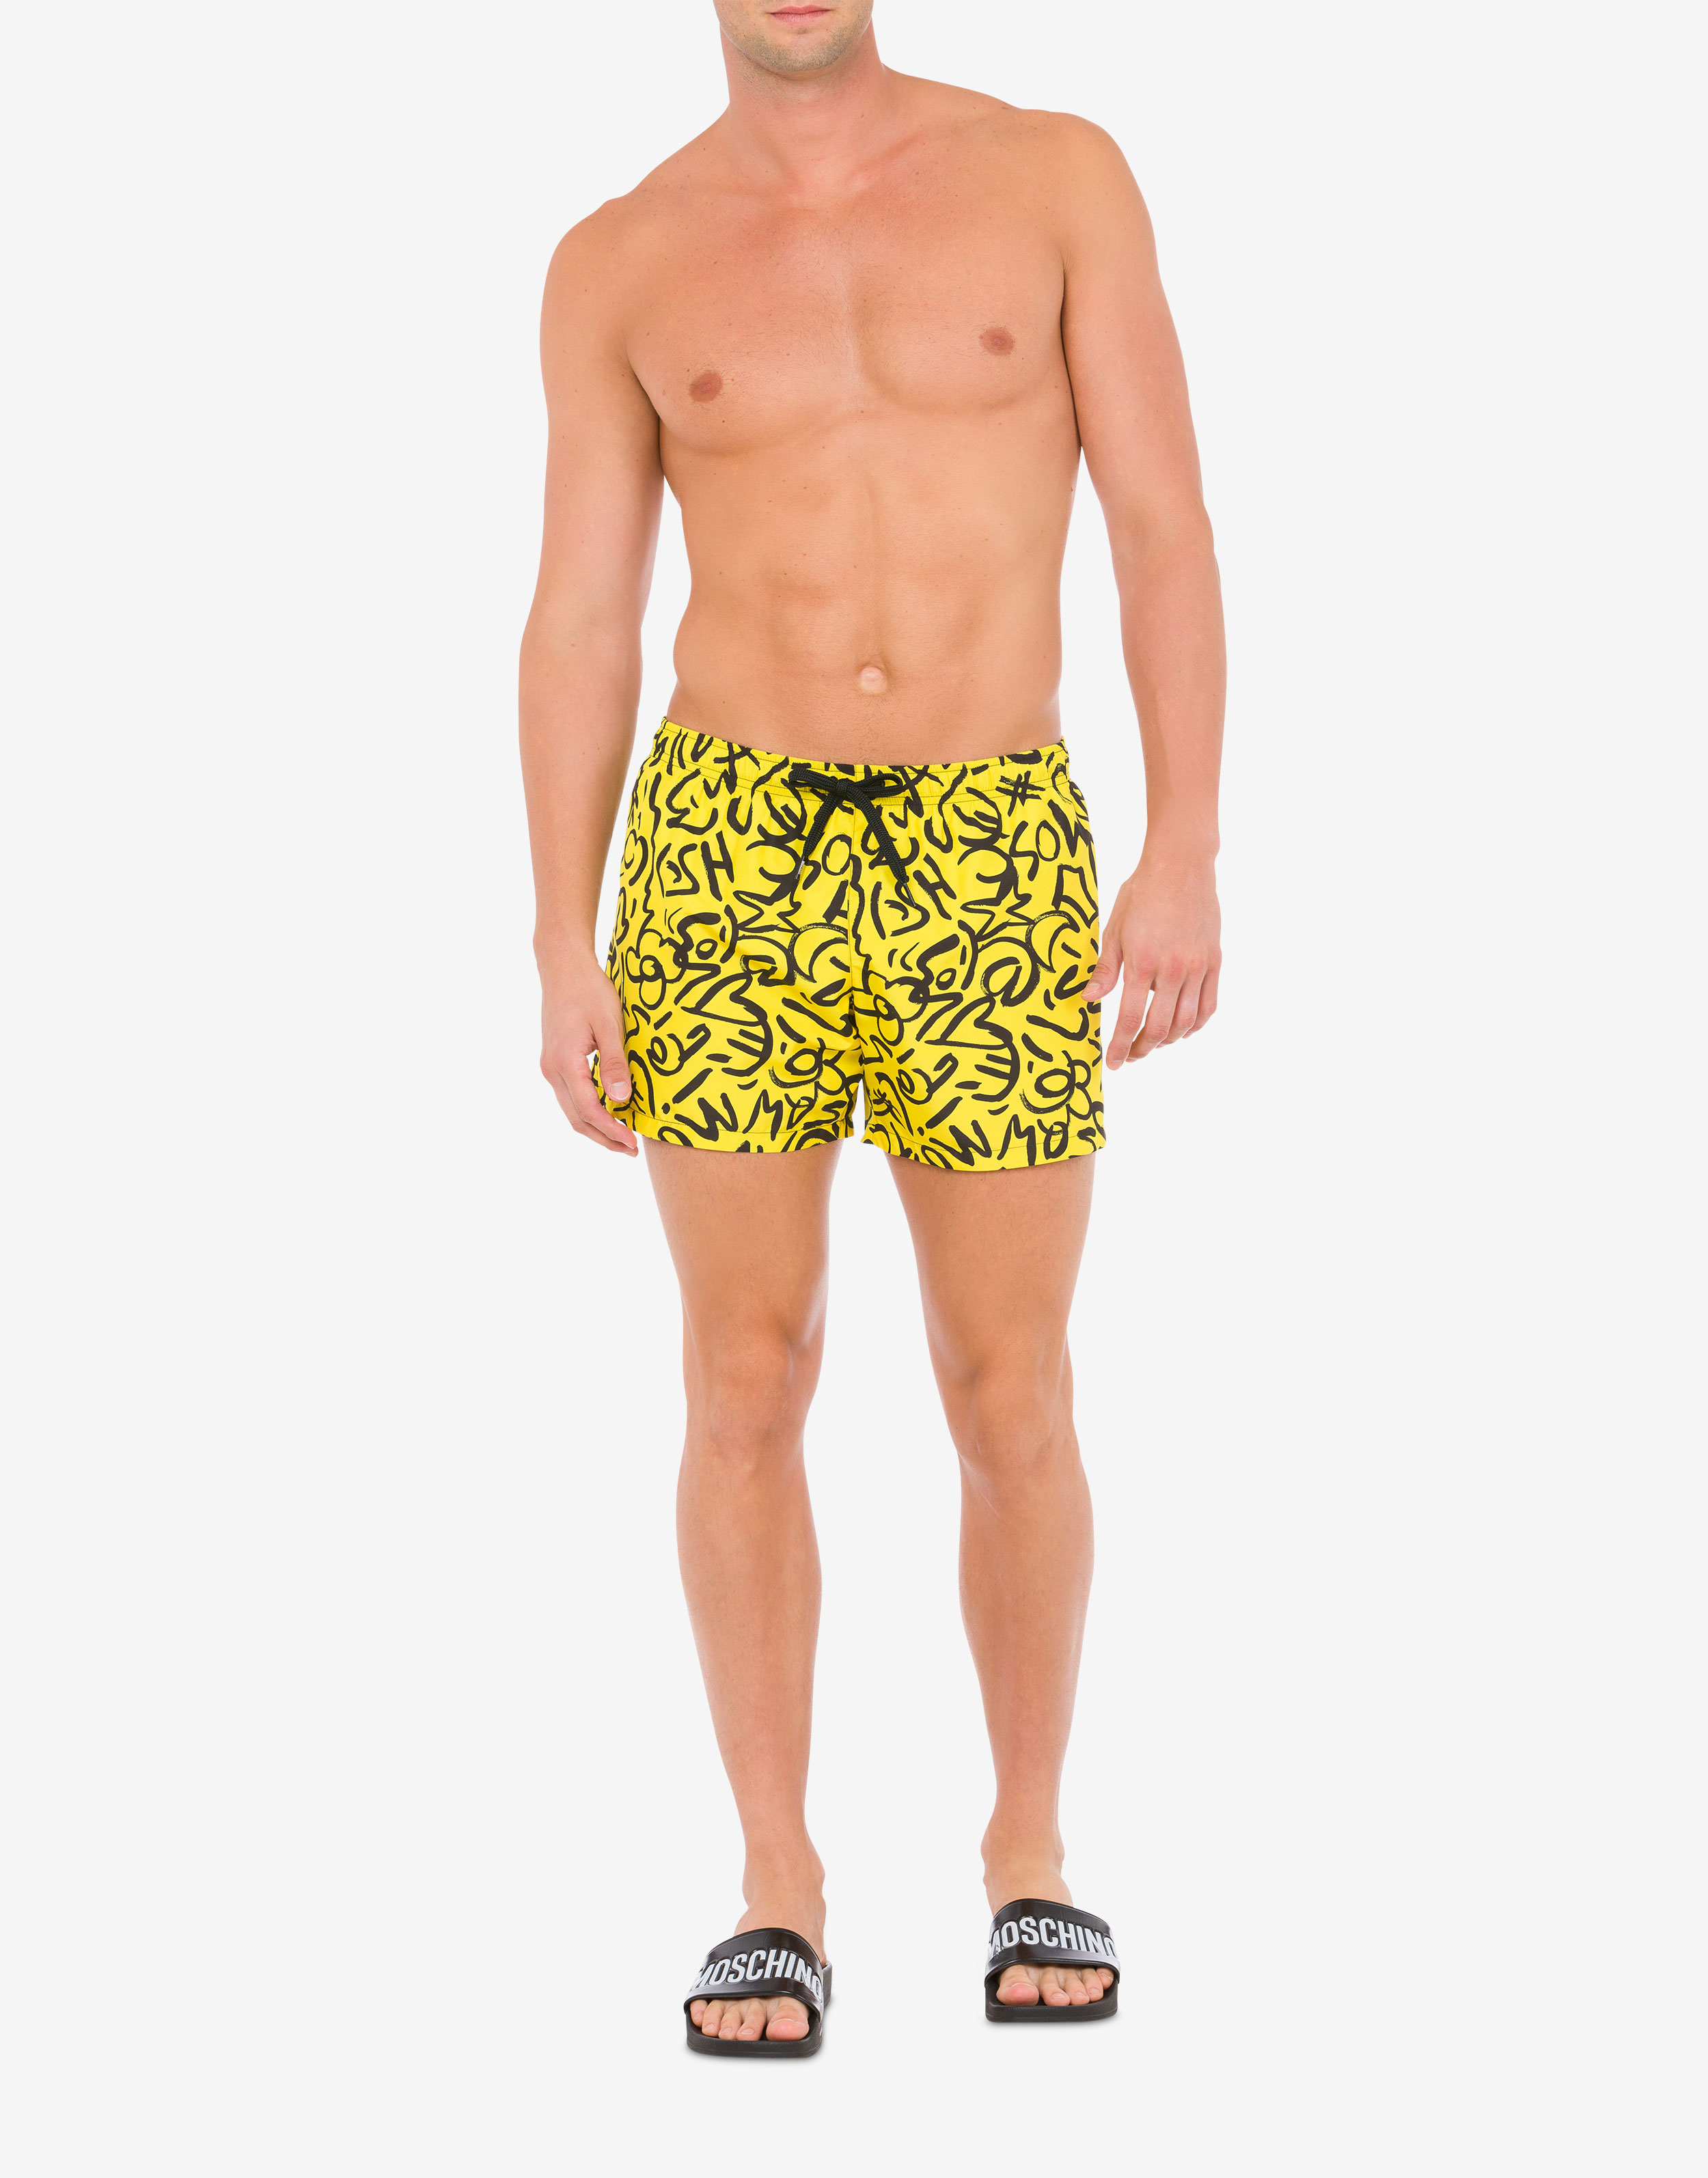 Moschino Swimwear for Men - Official Store